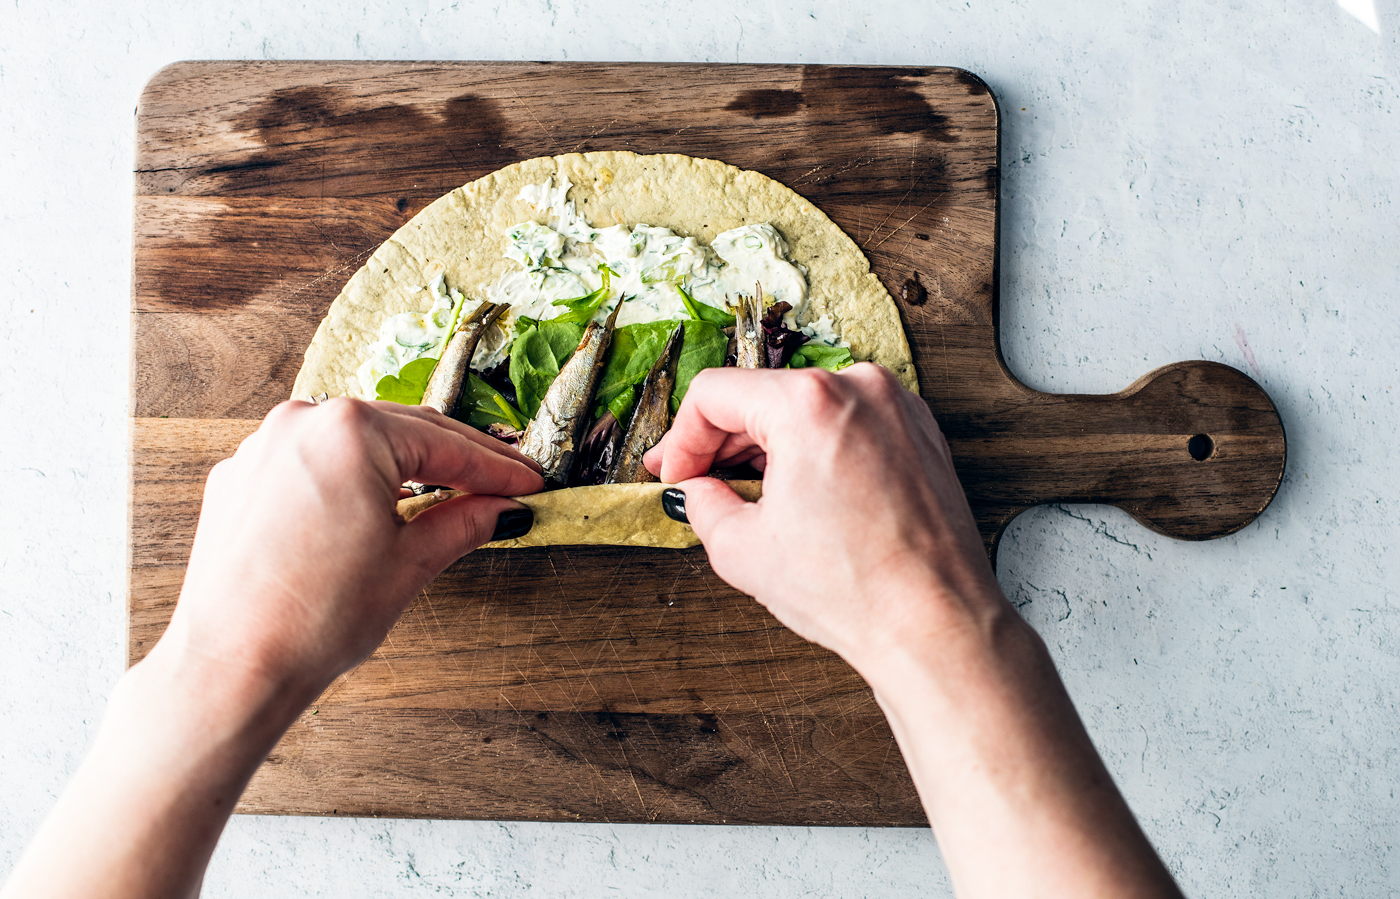 Hands rolling a tortilla, filled with greens and sardines, from the bottom up.